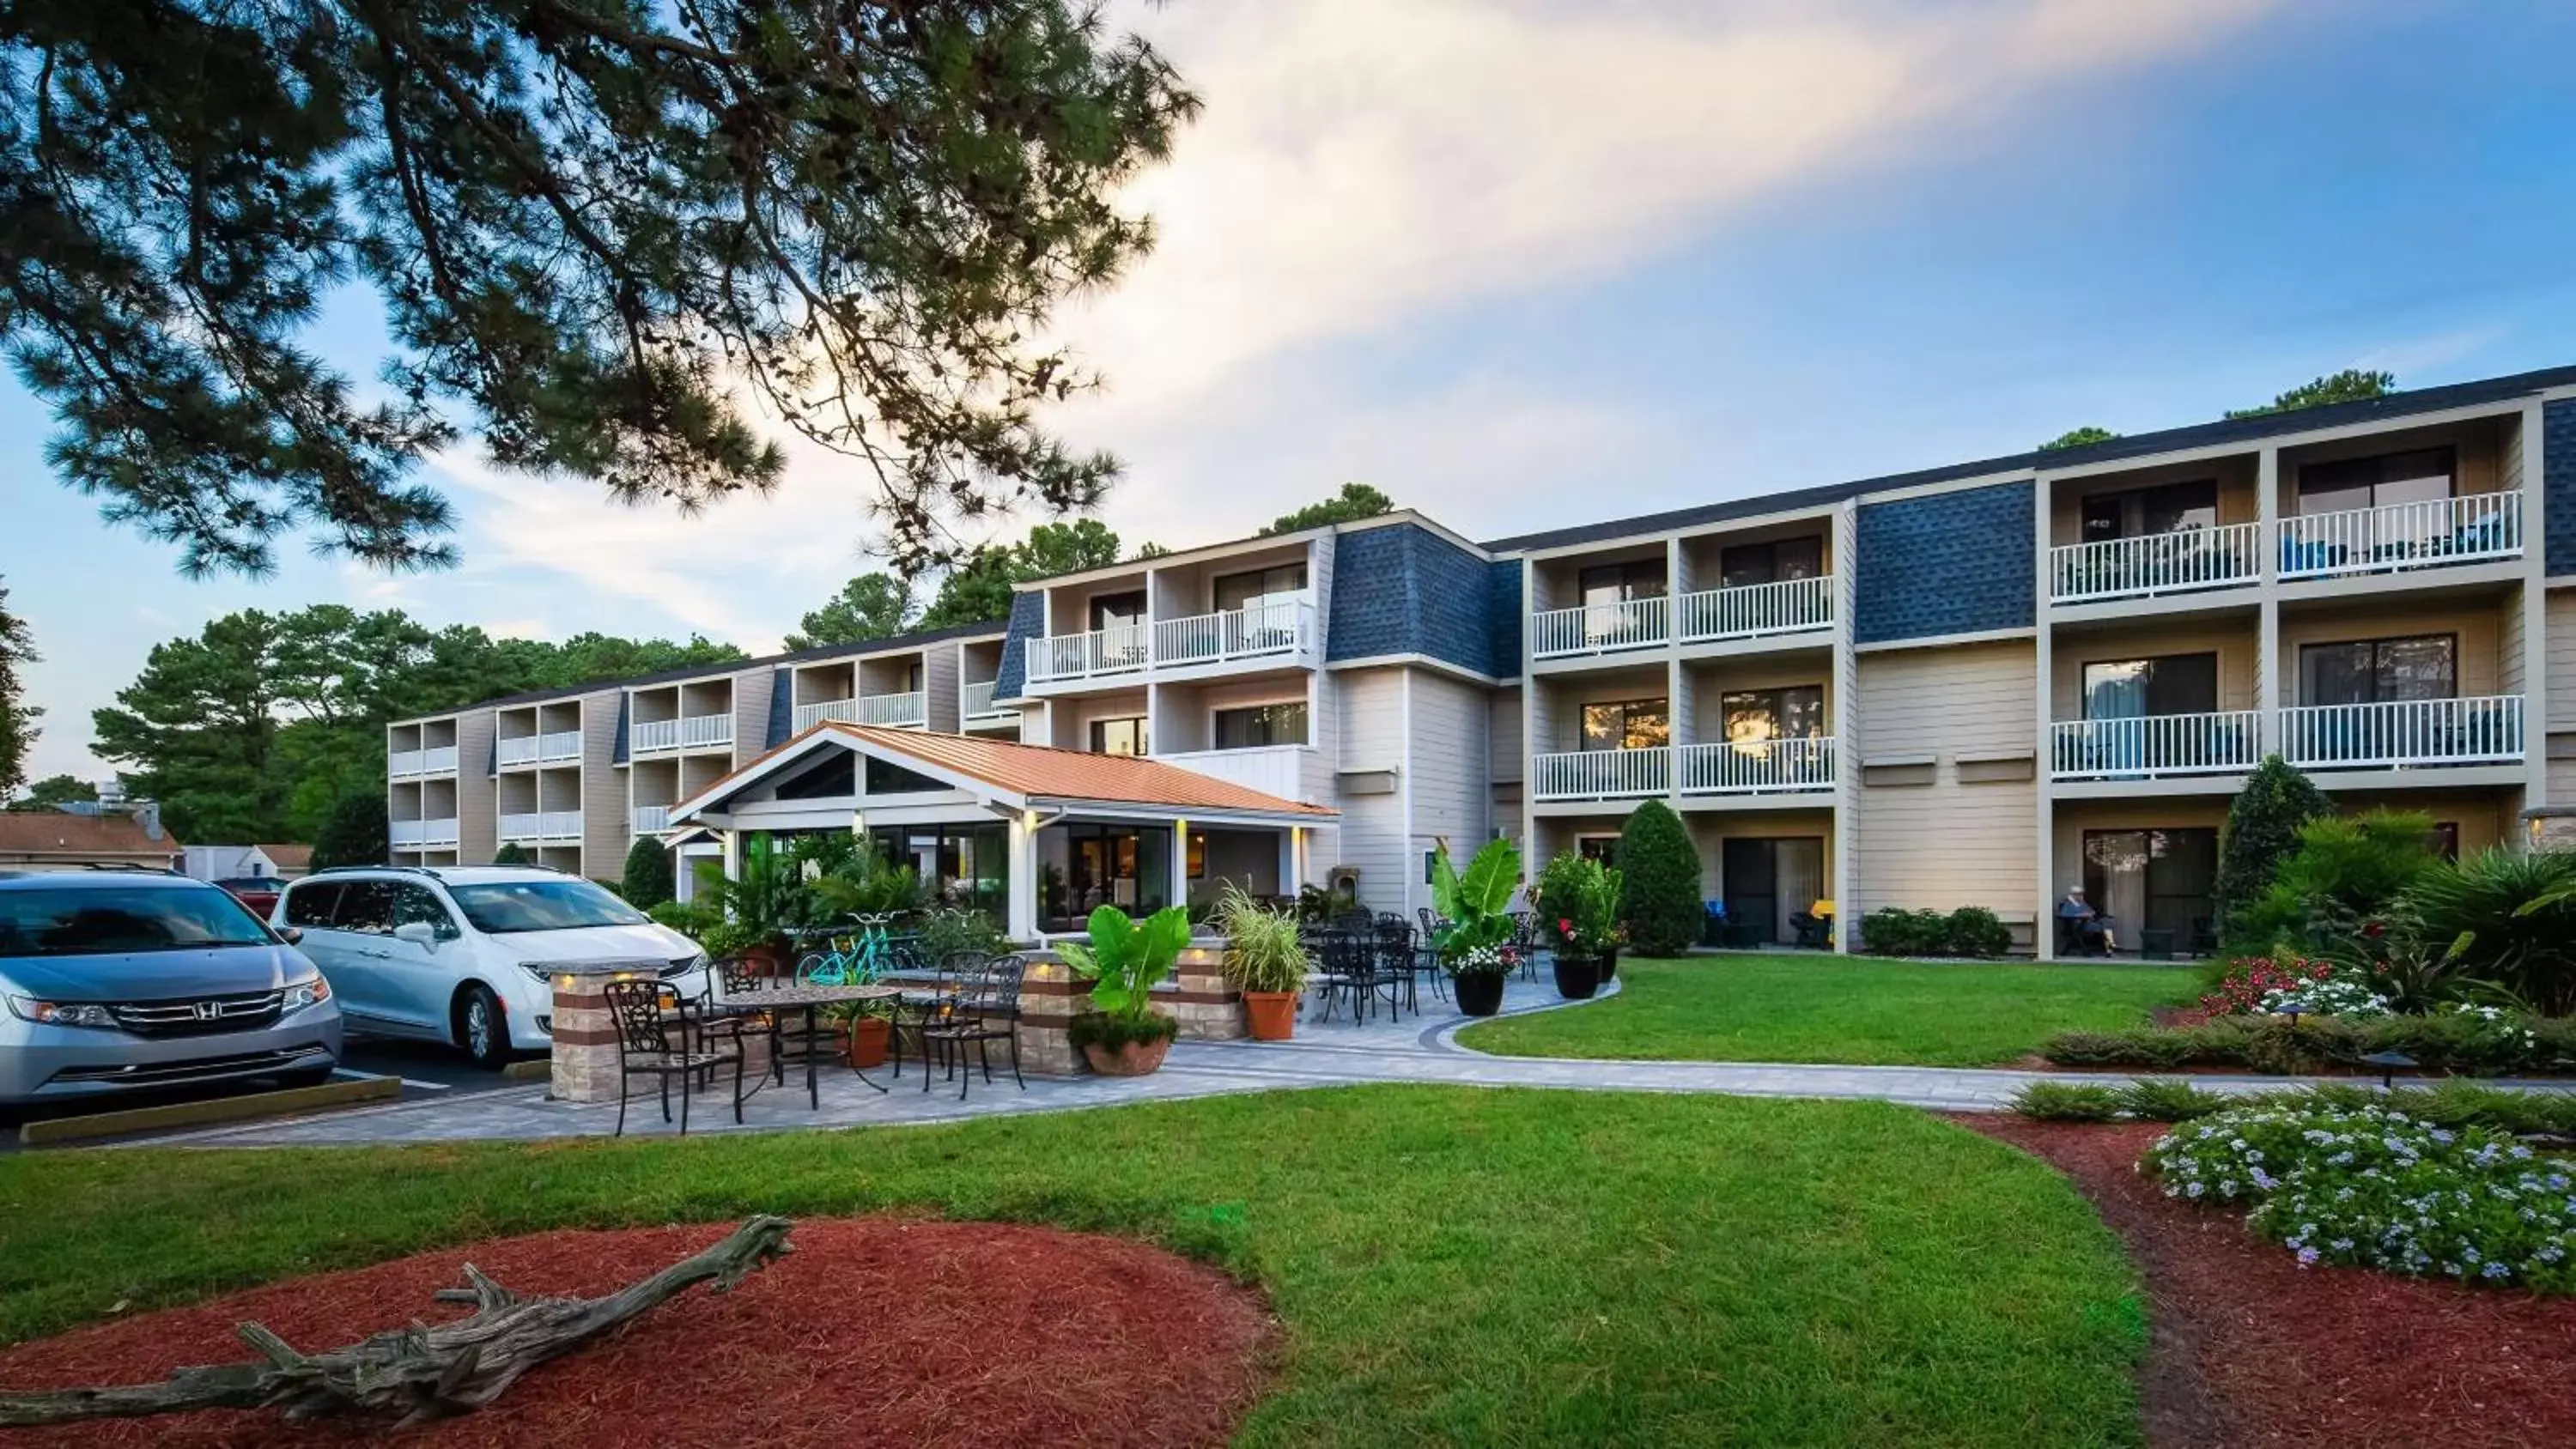 Property Building in Best Western Chincoteague Island